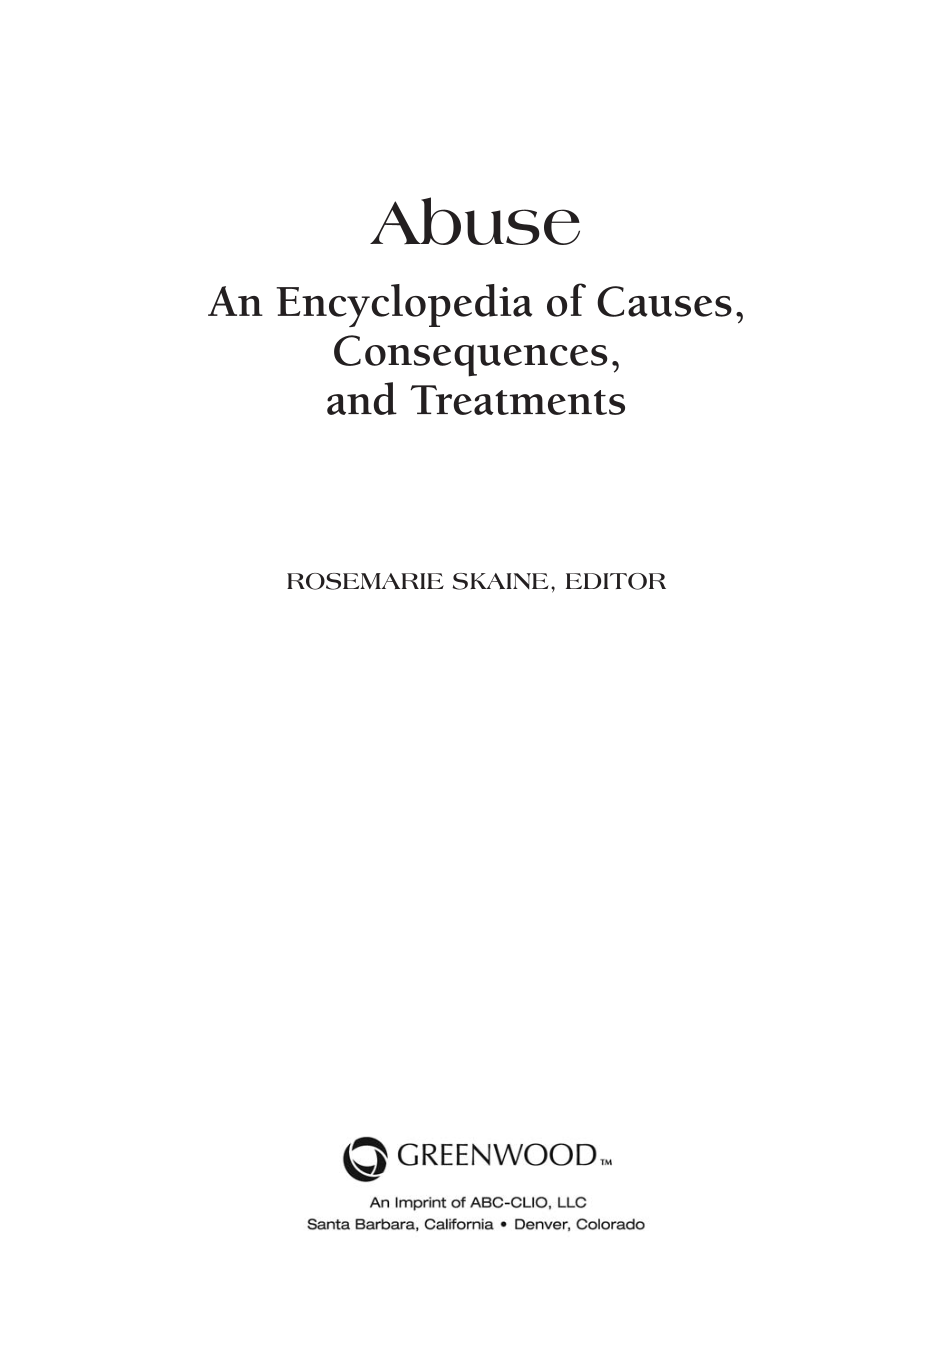 Abuse: An Encyclopedia of Causes, Consequences, and Treatments page iii